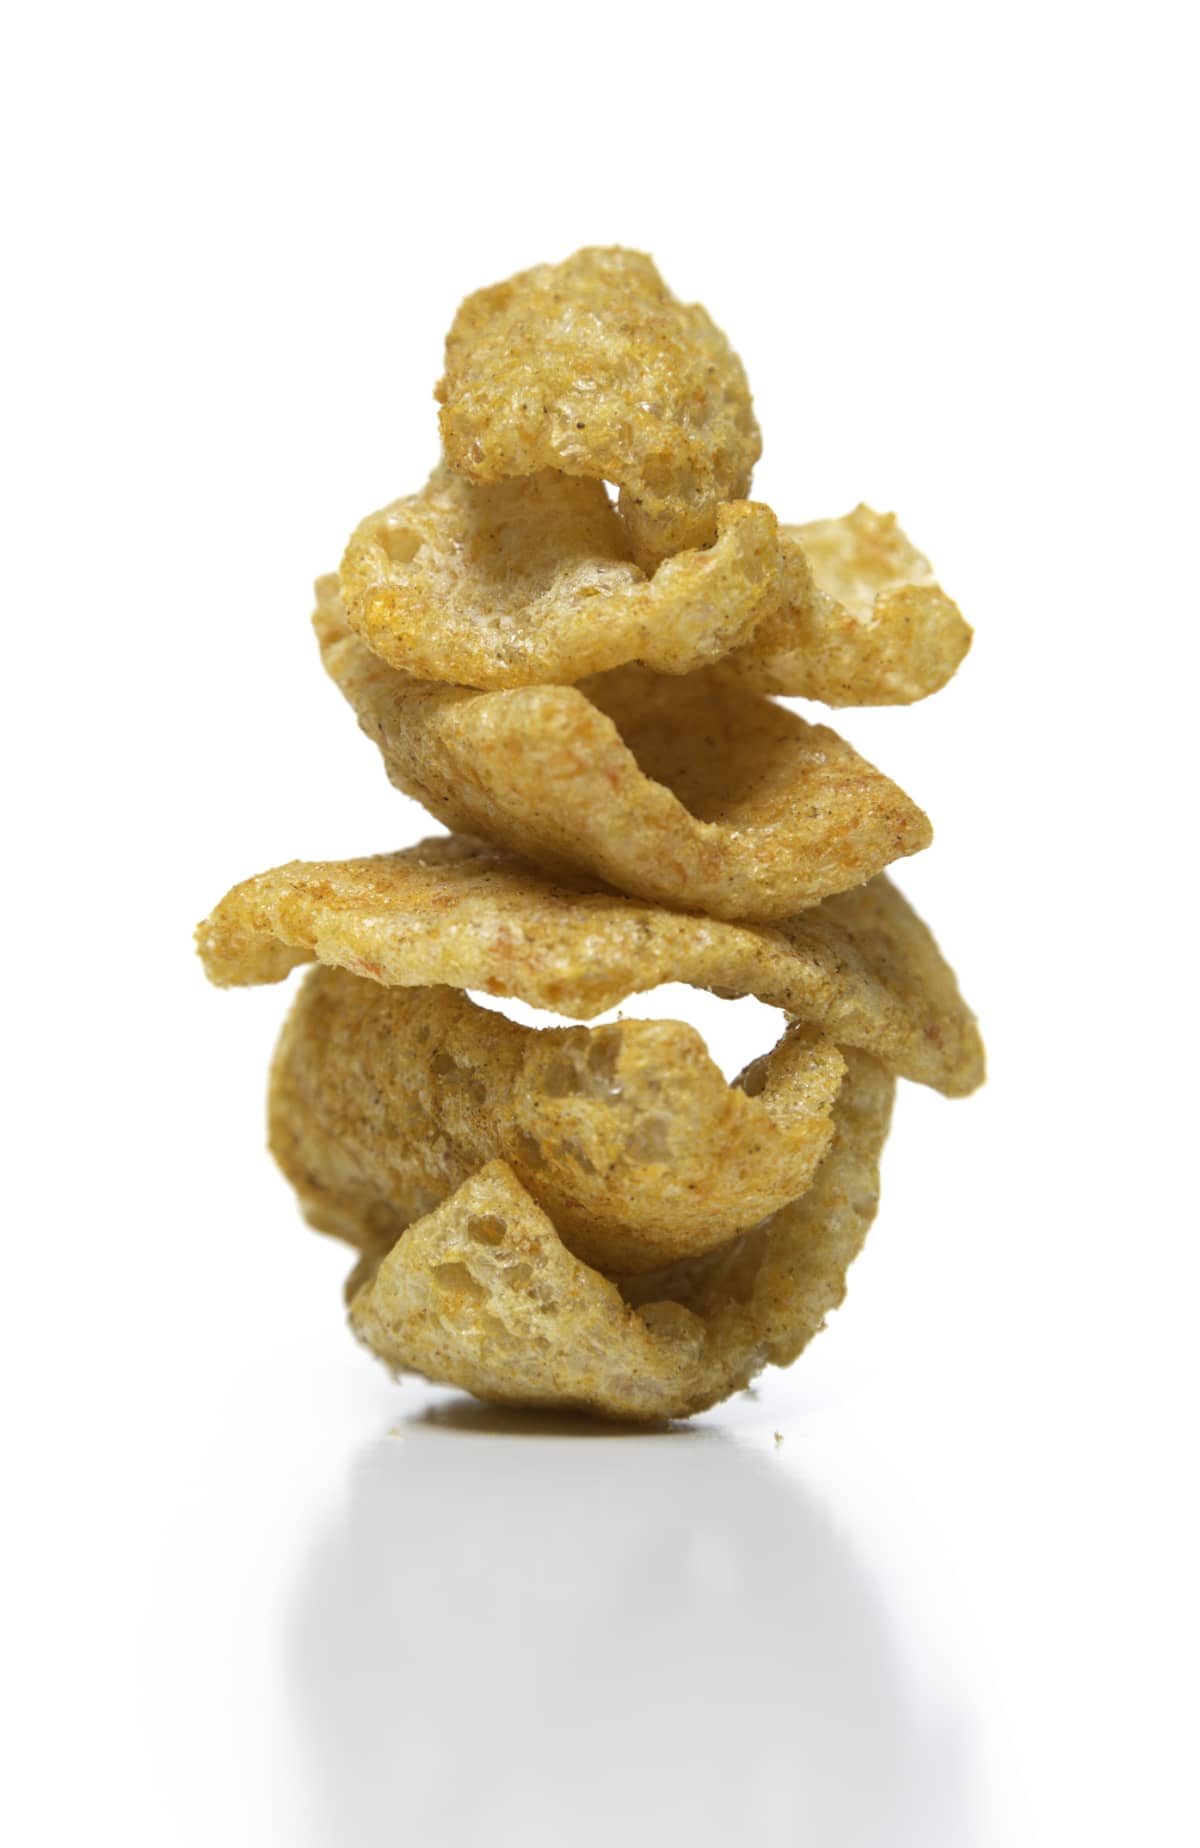 Stacked fried pork rinds on white background